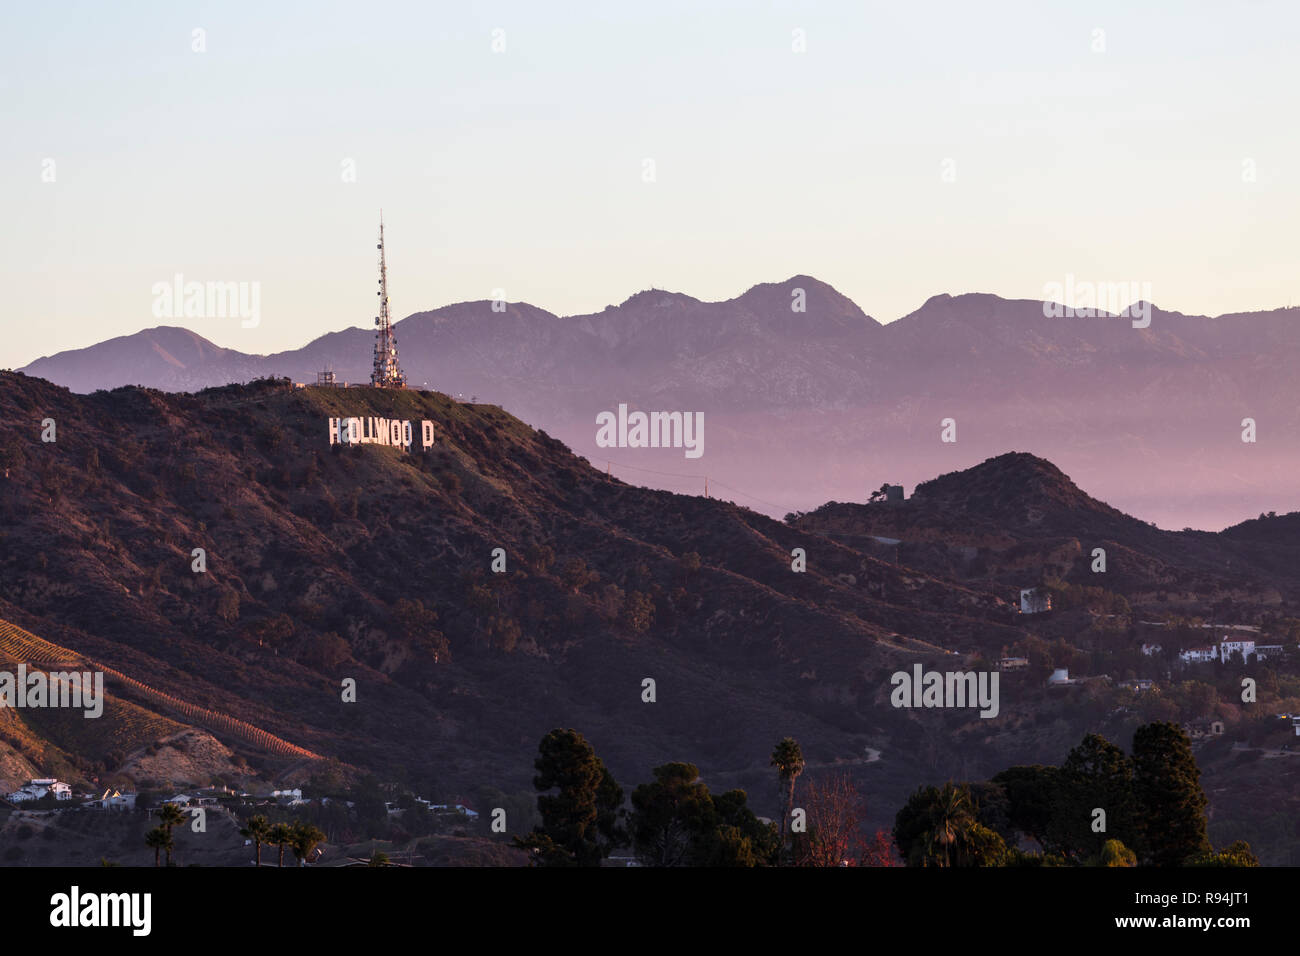 Los Angeles, California, USA - December 16, 2018:  The famous Hollywood Sign and Griffith Park with the San Gabriel Mountains in background. Stock Photo